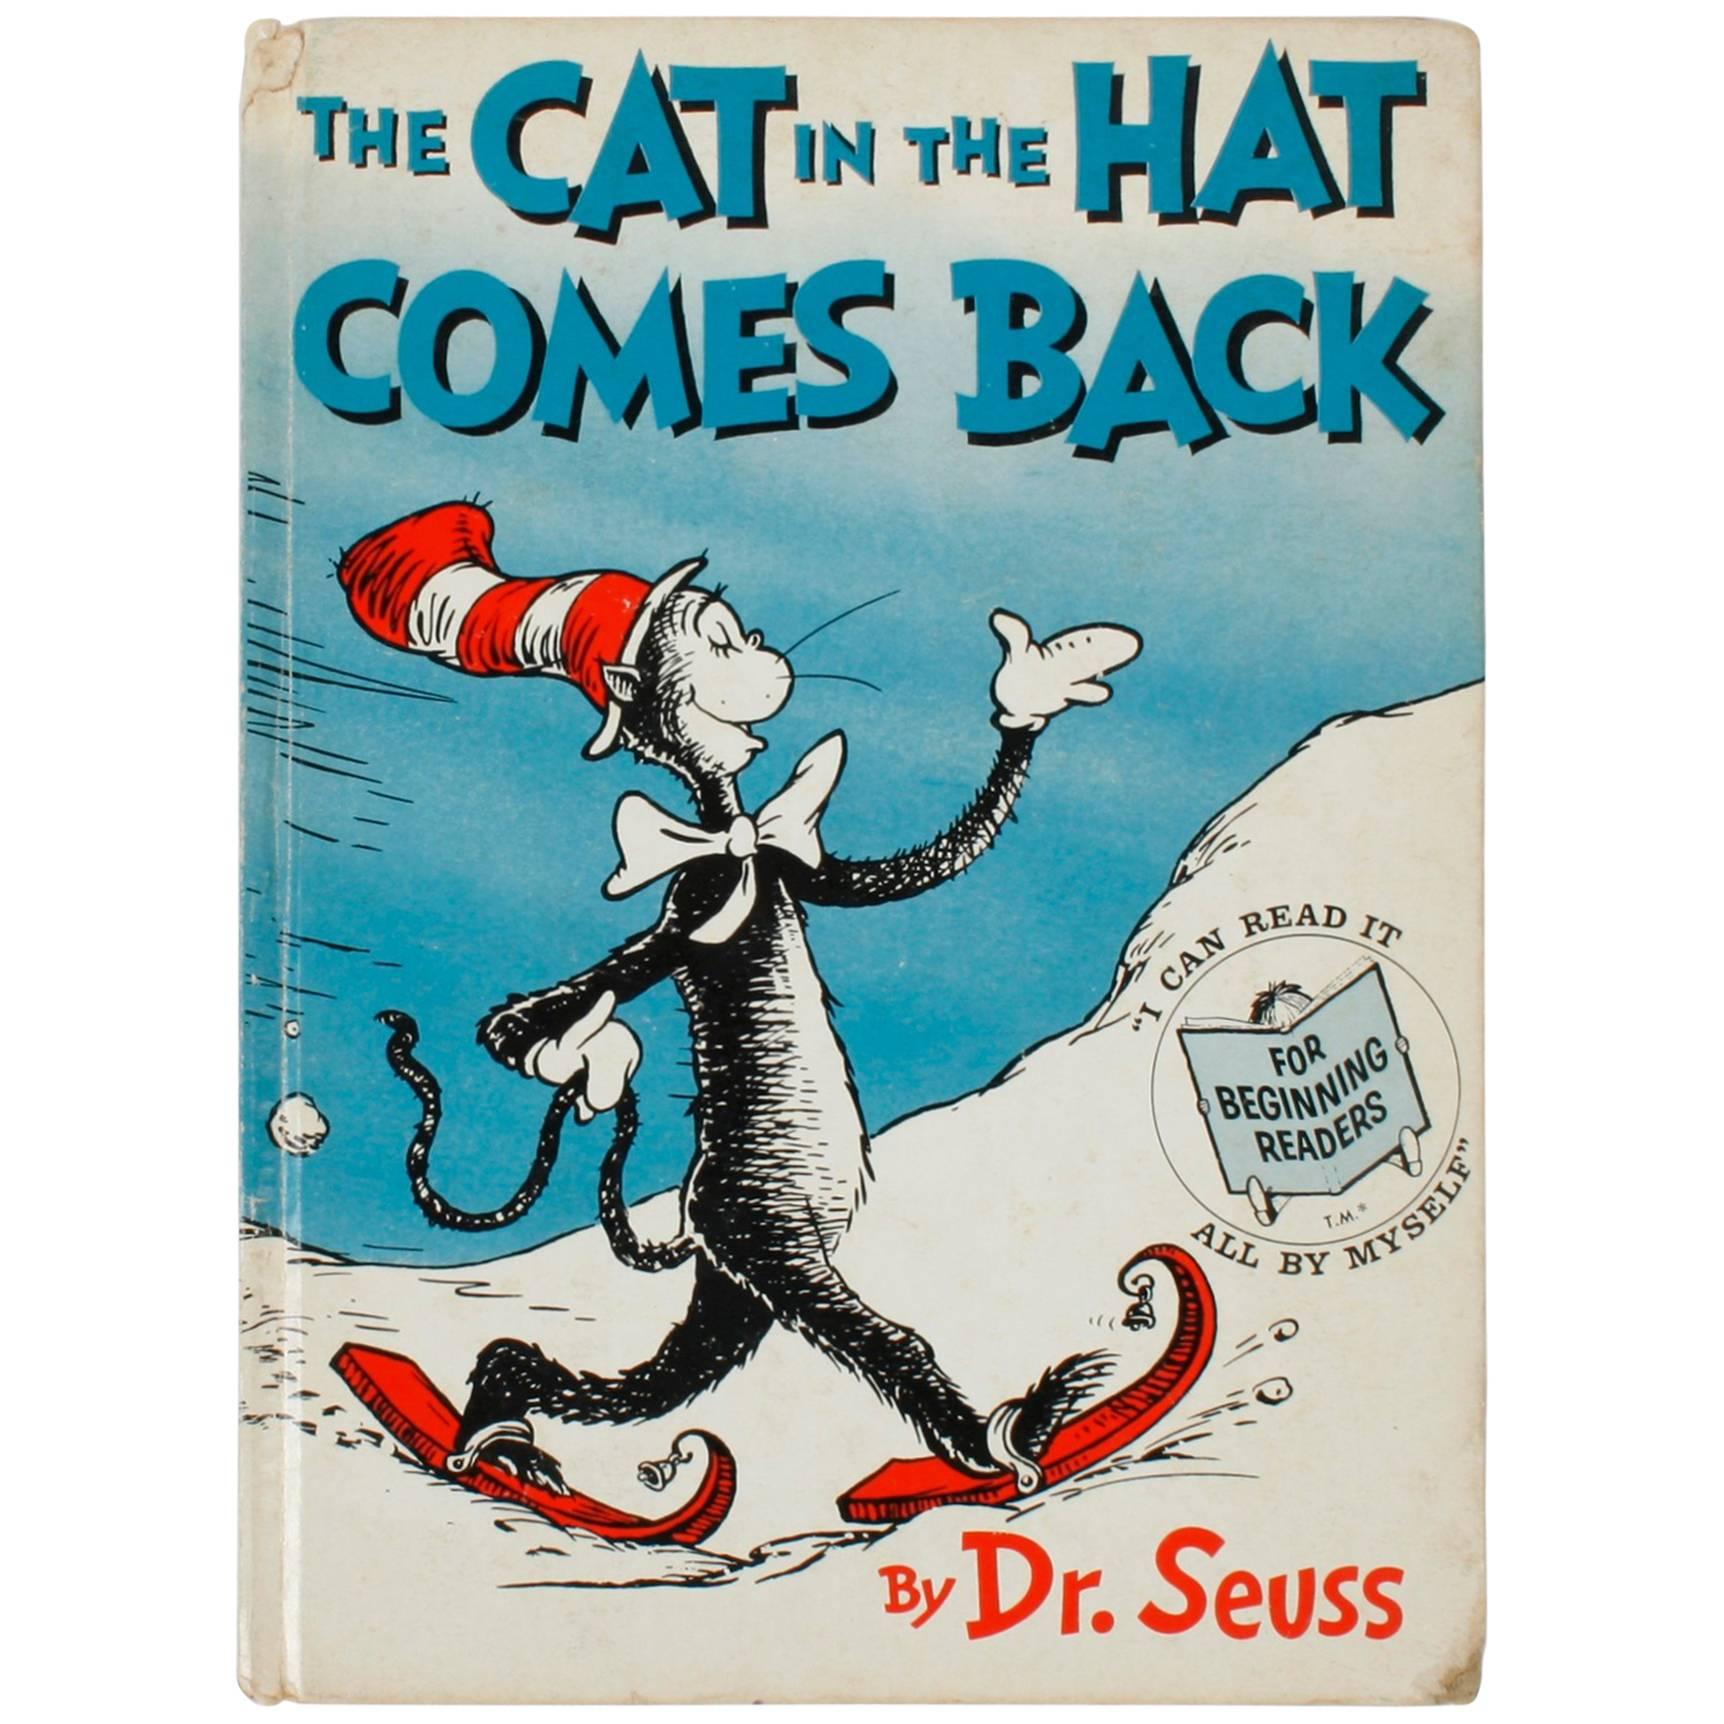 The Cat in the Hat Comes Back, First Edition by Dr. Seuss